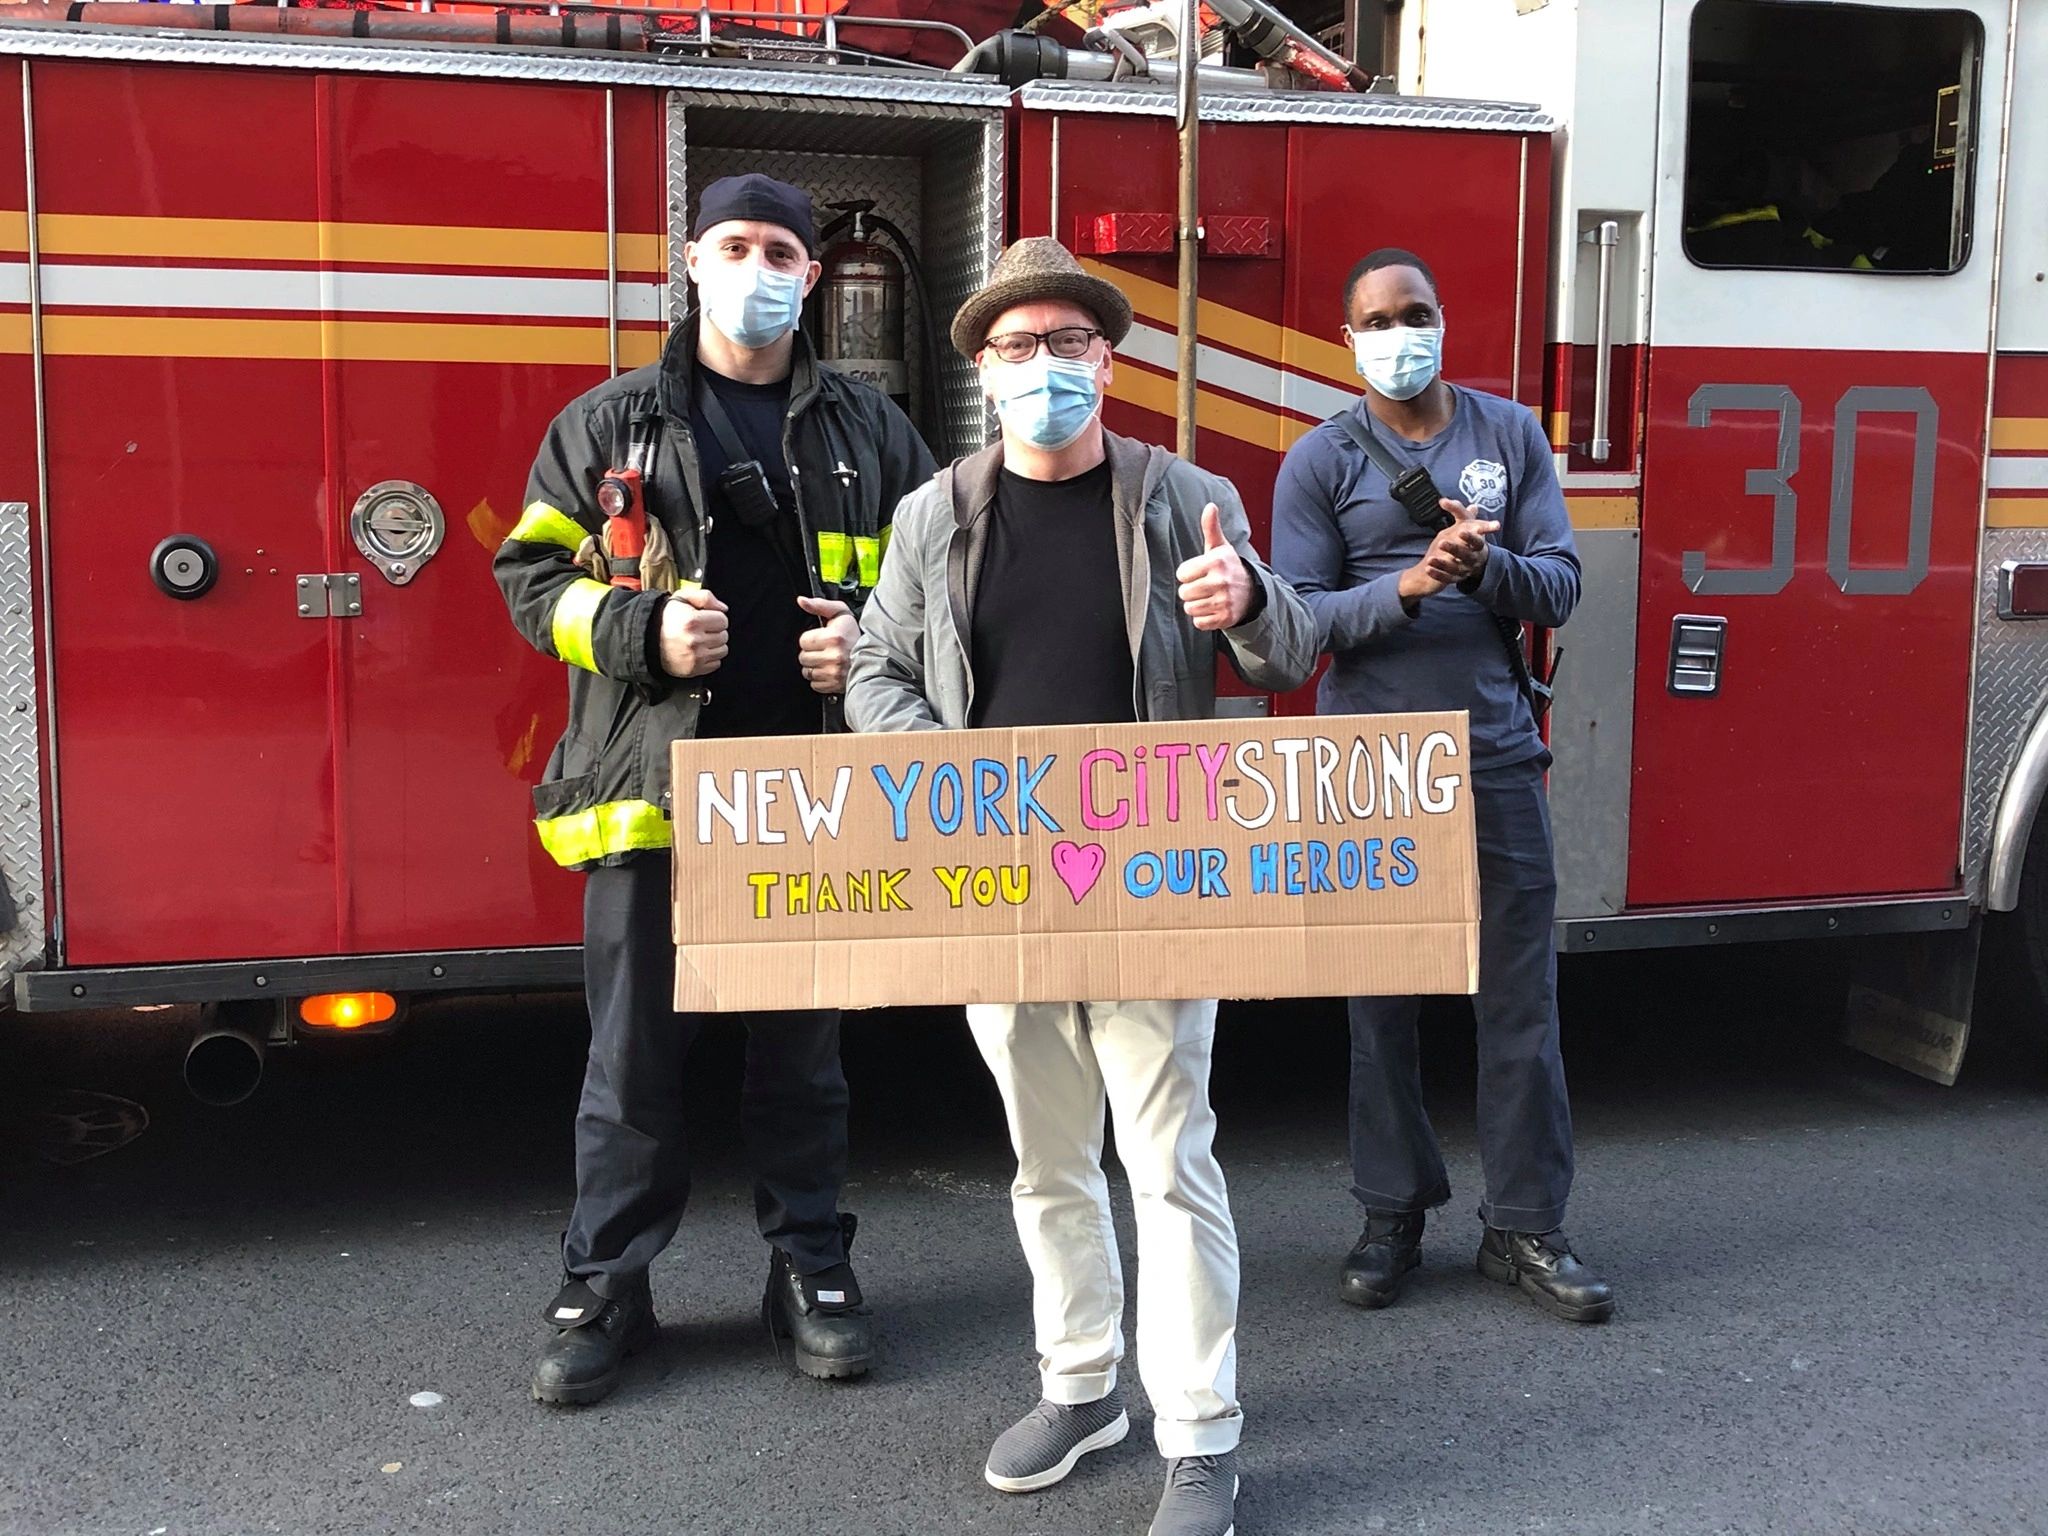 NYC Strong with NYFD